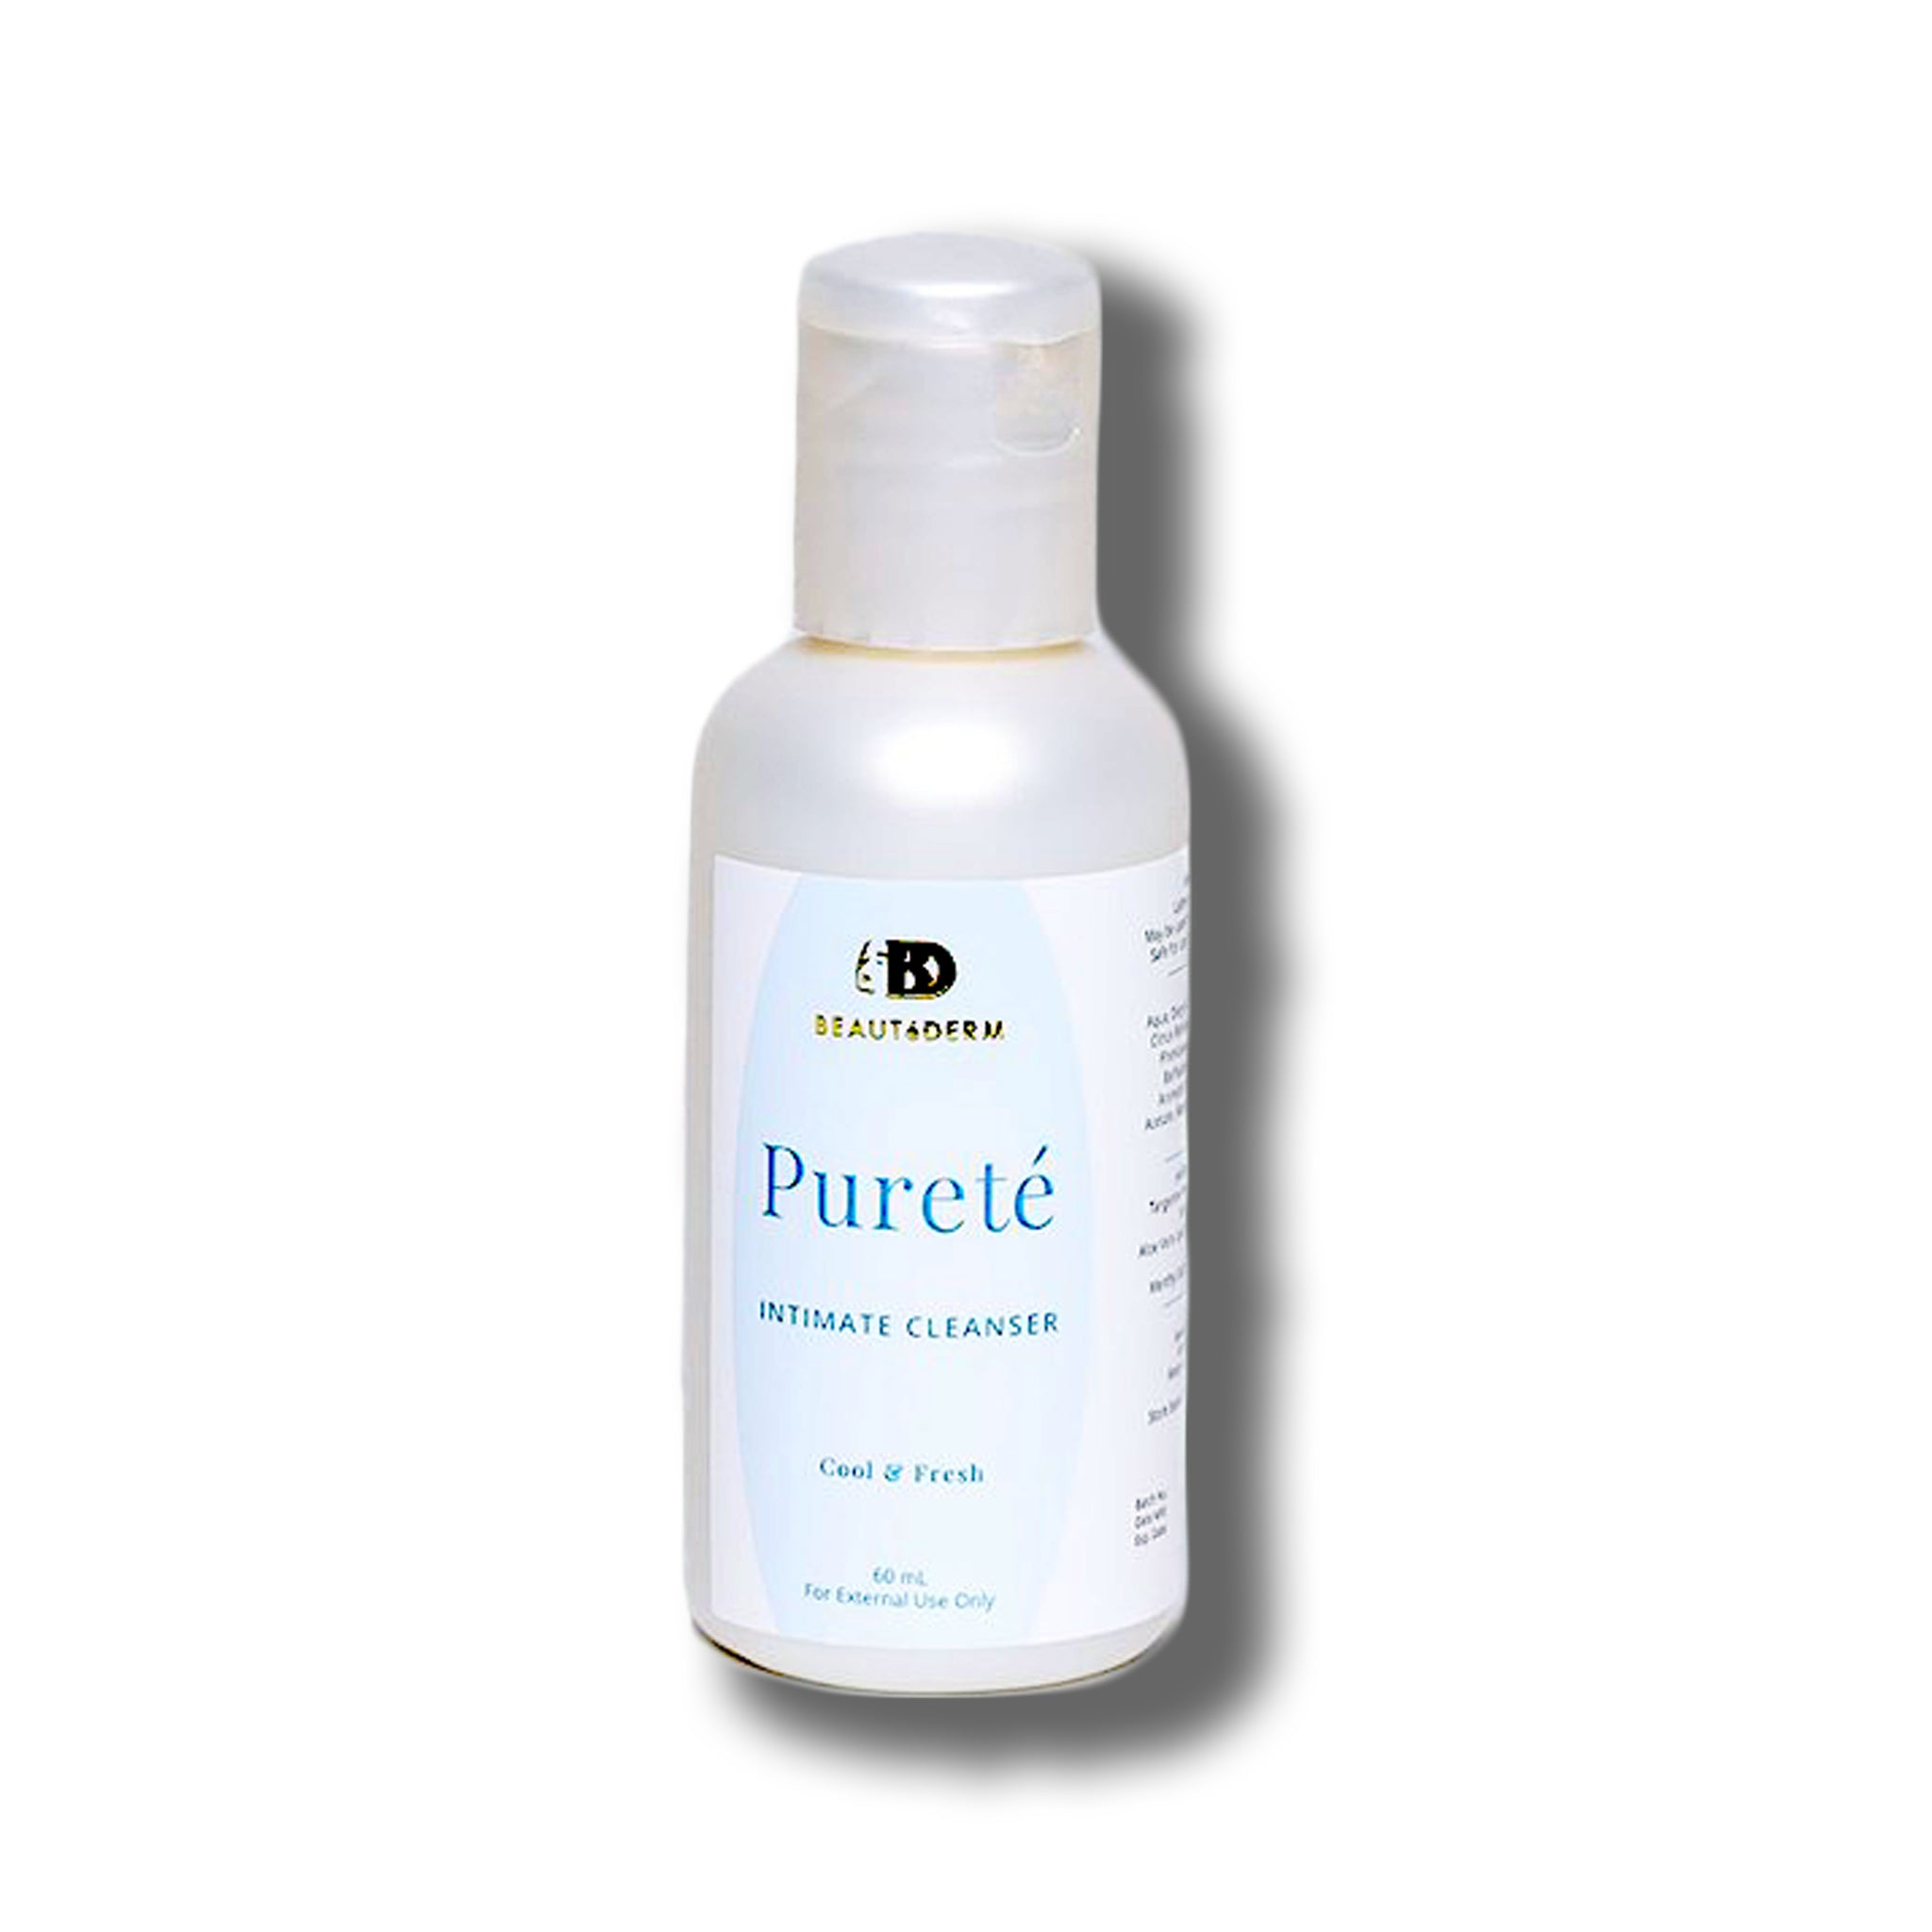 Purete Intimate Cleanser, Cool & Fresh, 60ml, by Beautederm